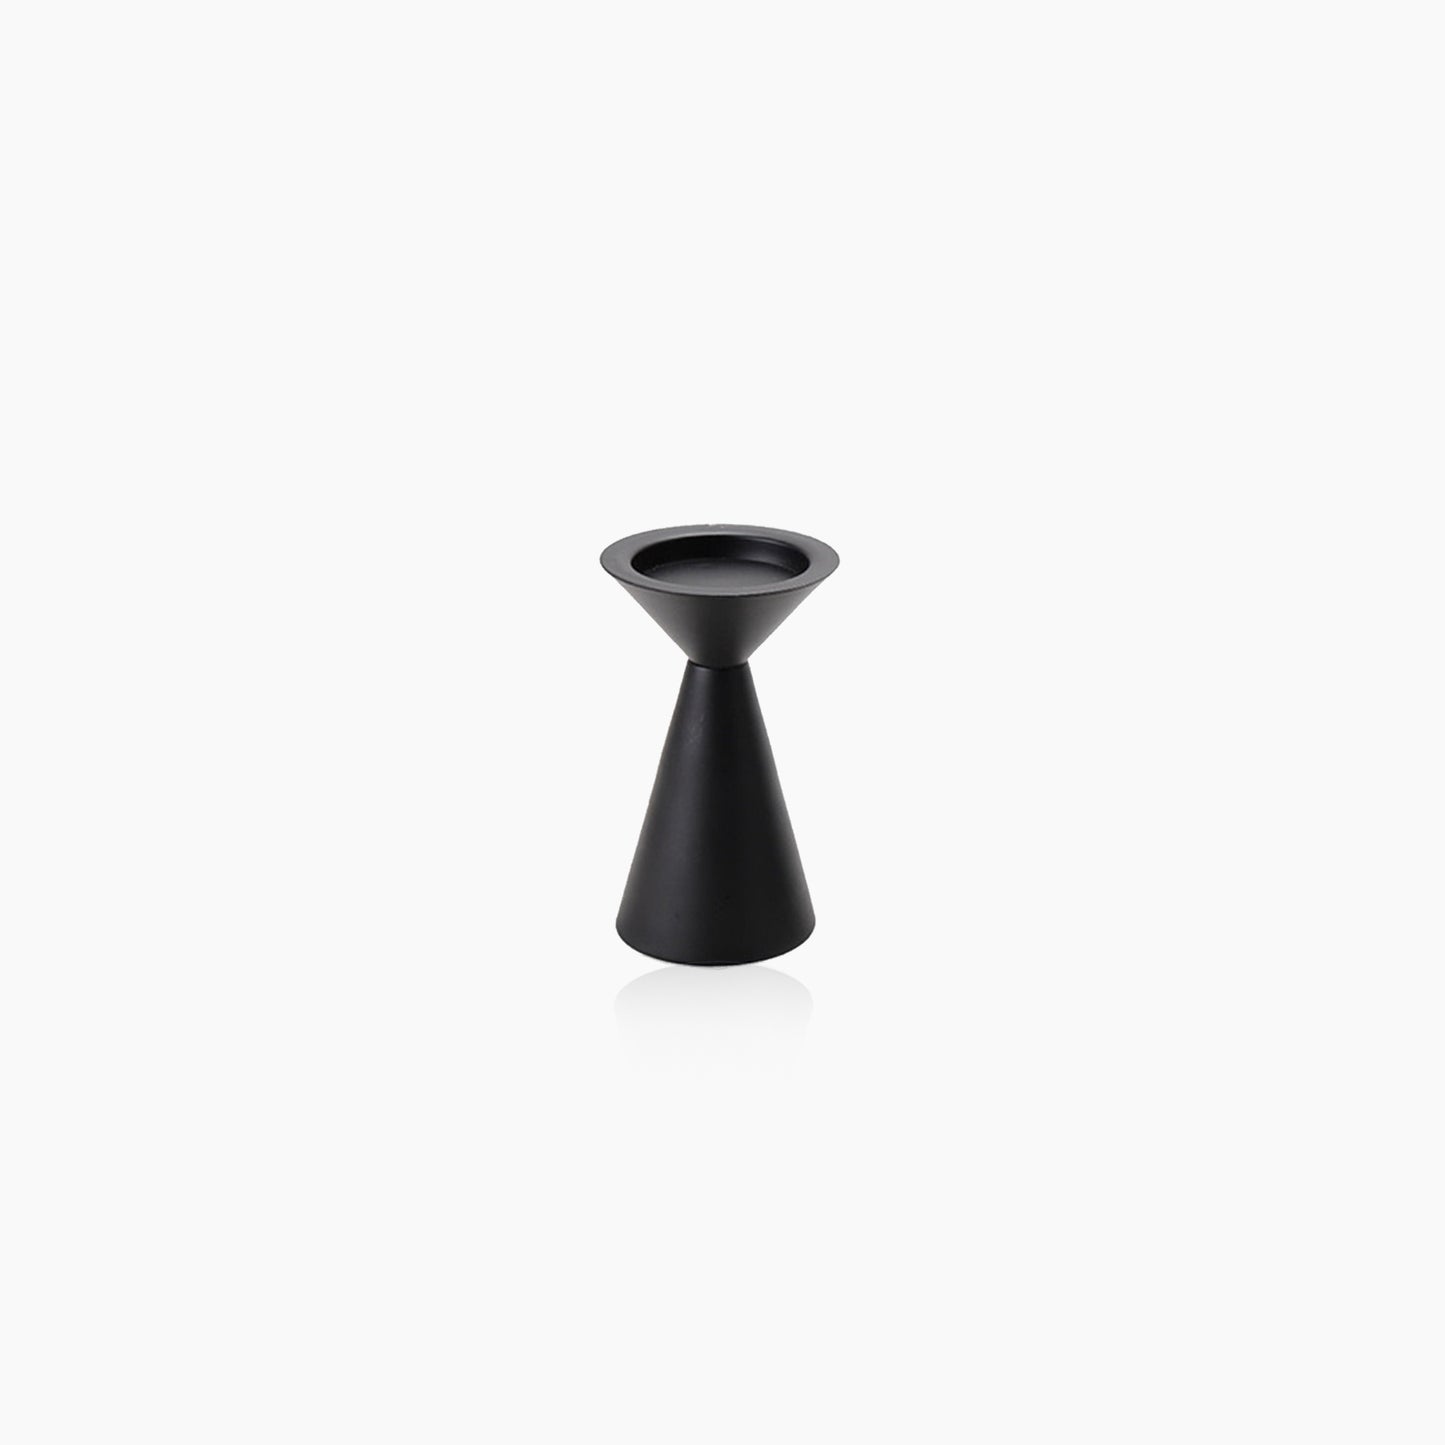 European Style Black Matte Metal Candle Stand